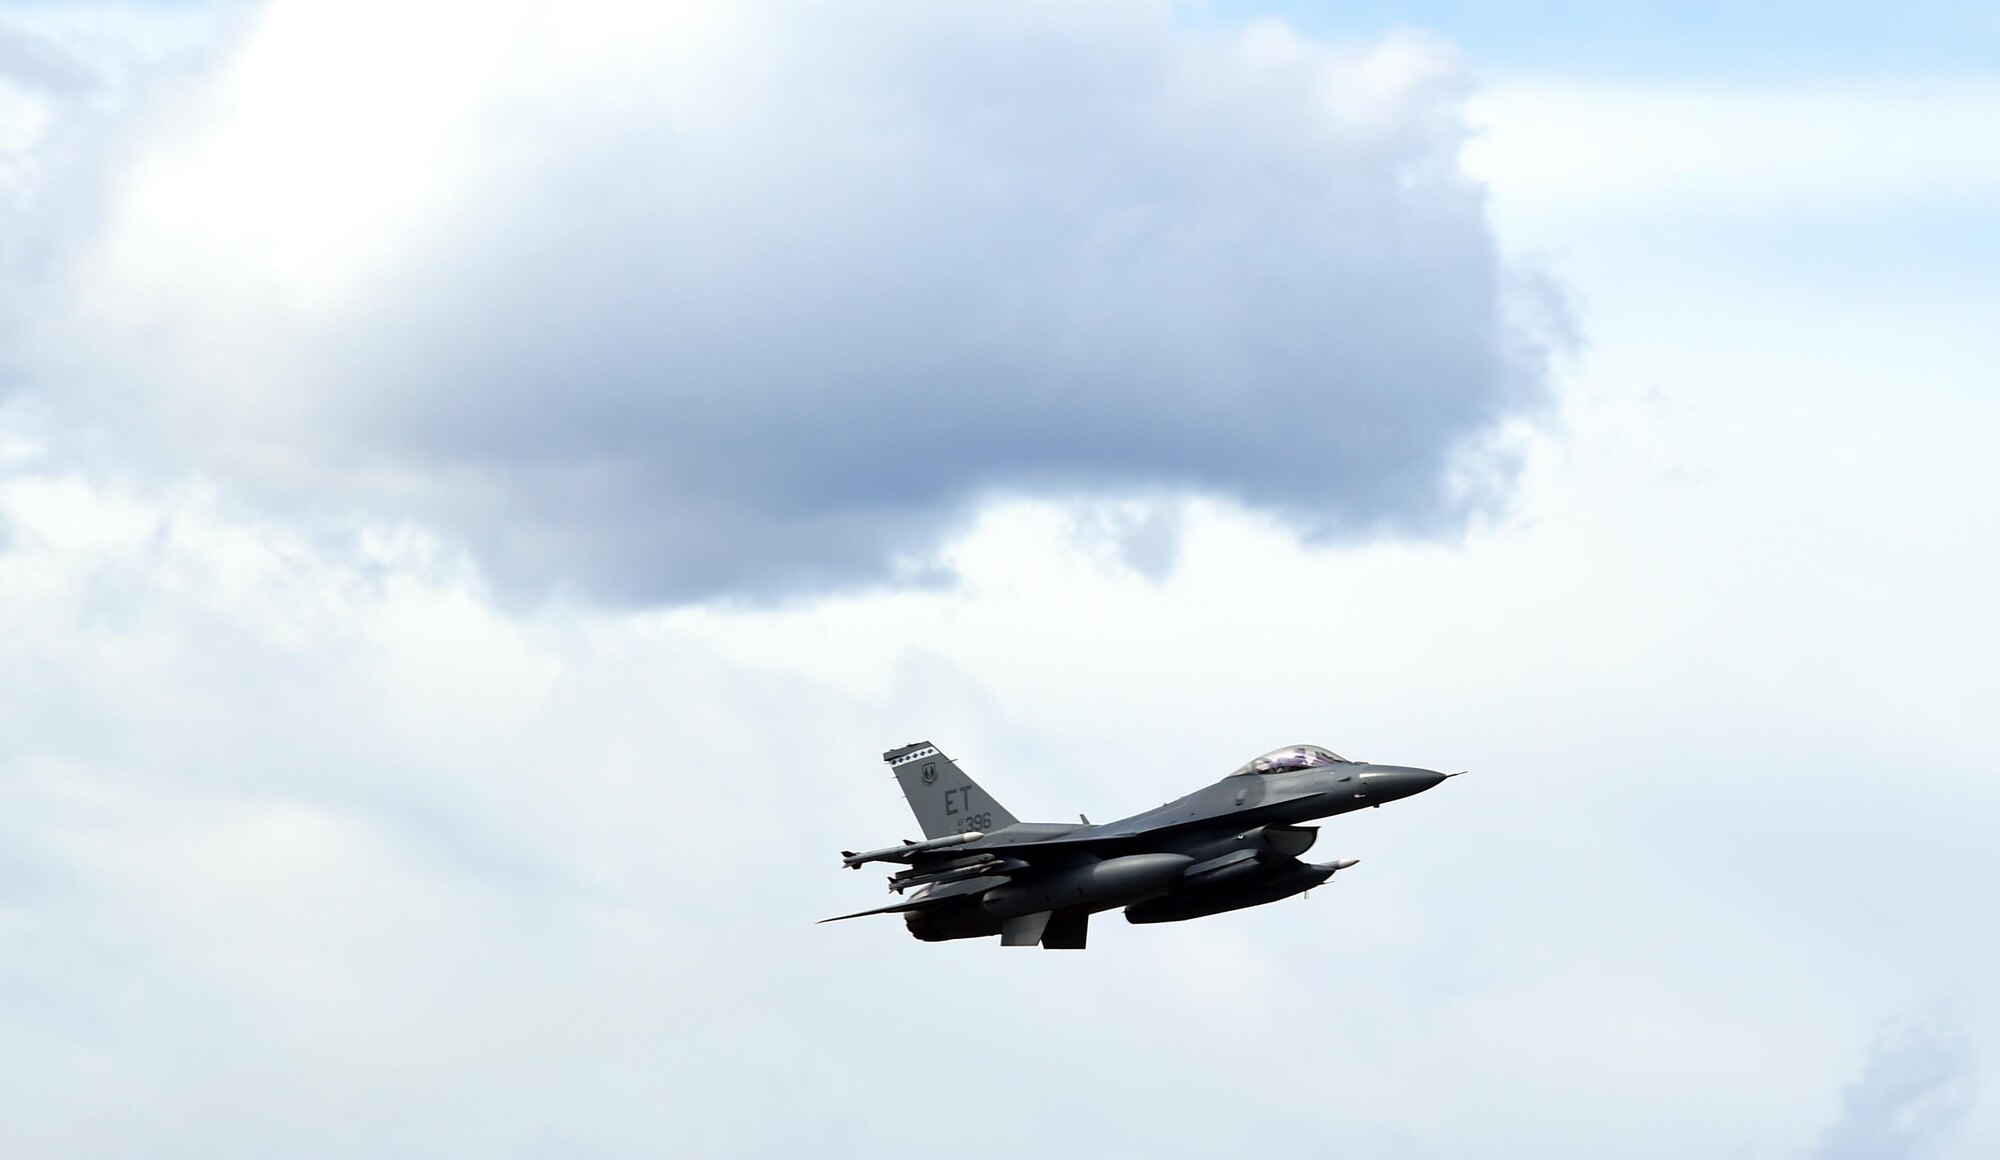 An F-16 Fighting Falcon from Eglin Air Force Base Fla., takes off at Joint Base Elmendorf-Richardson, Alaska, during exercise Northern Edge 17, May 3, 2017. Northern Edge is Alaska’s premier joint training exercise designed to practice operations, techniques and procedures as well as enhance interoperability among the services. Thousands of participants from all the services – Airmen, Soldiers, Sailors, Marines and Coast Guardsmen from active duty, Reserve and National Guard units – are involved. (U.S. Air Force photo by Airman 1st Class Javier Alvarez)